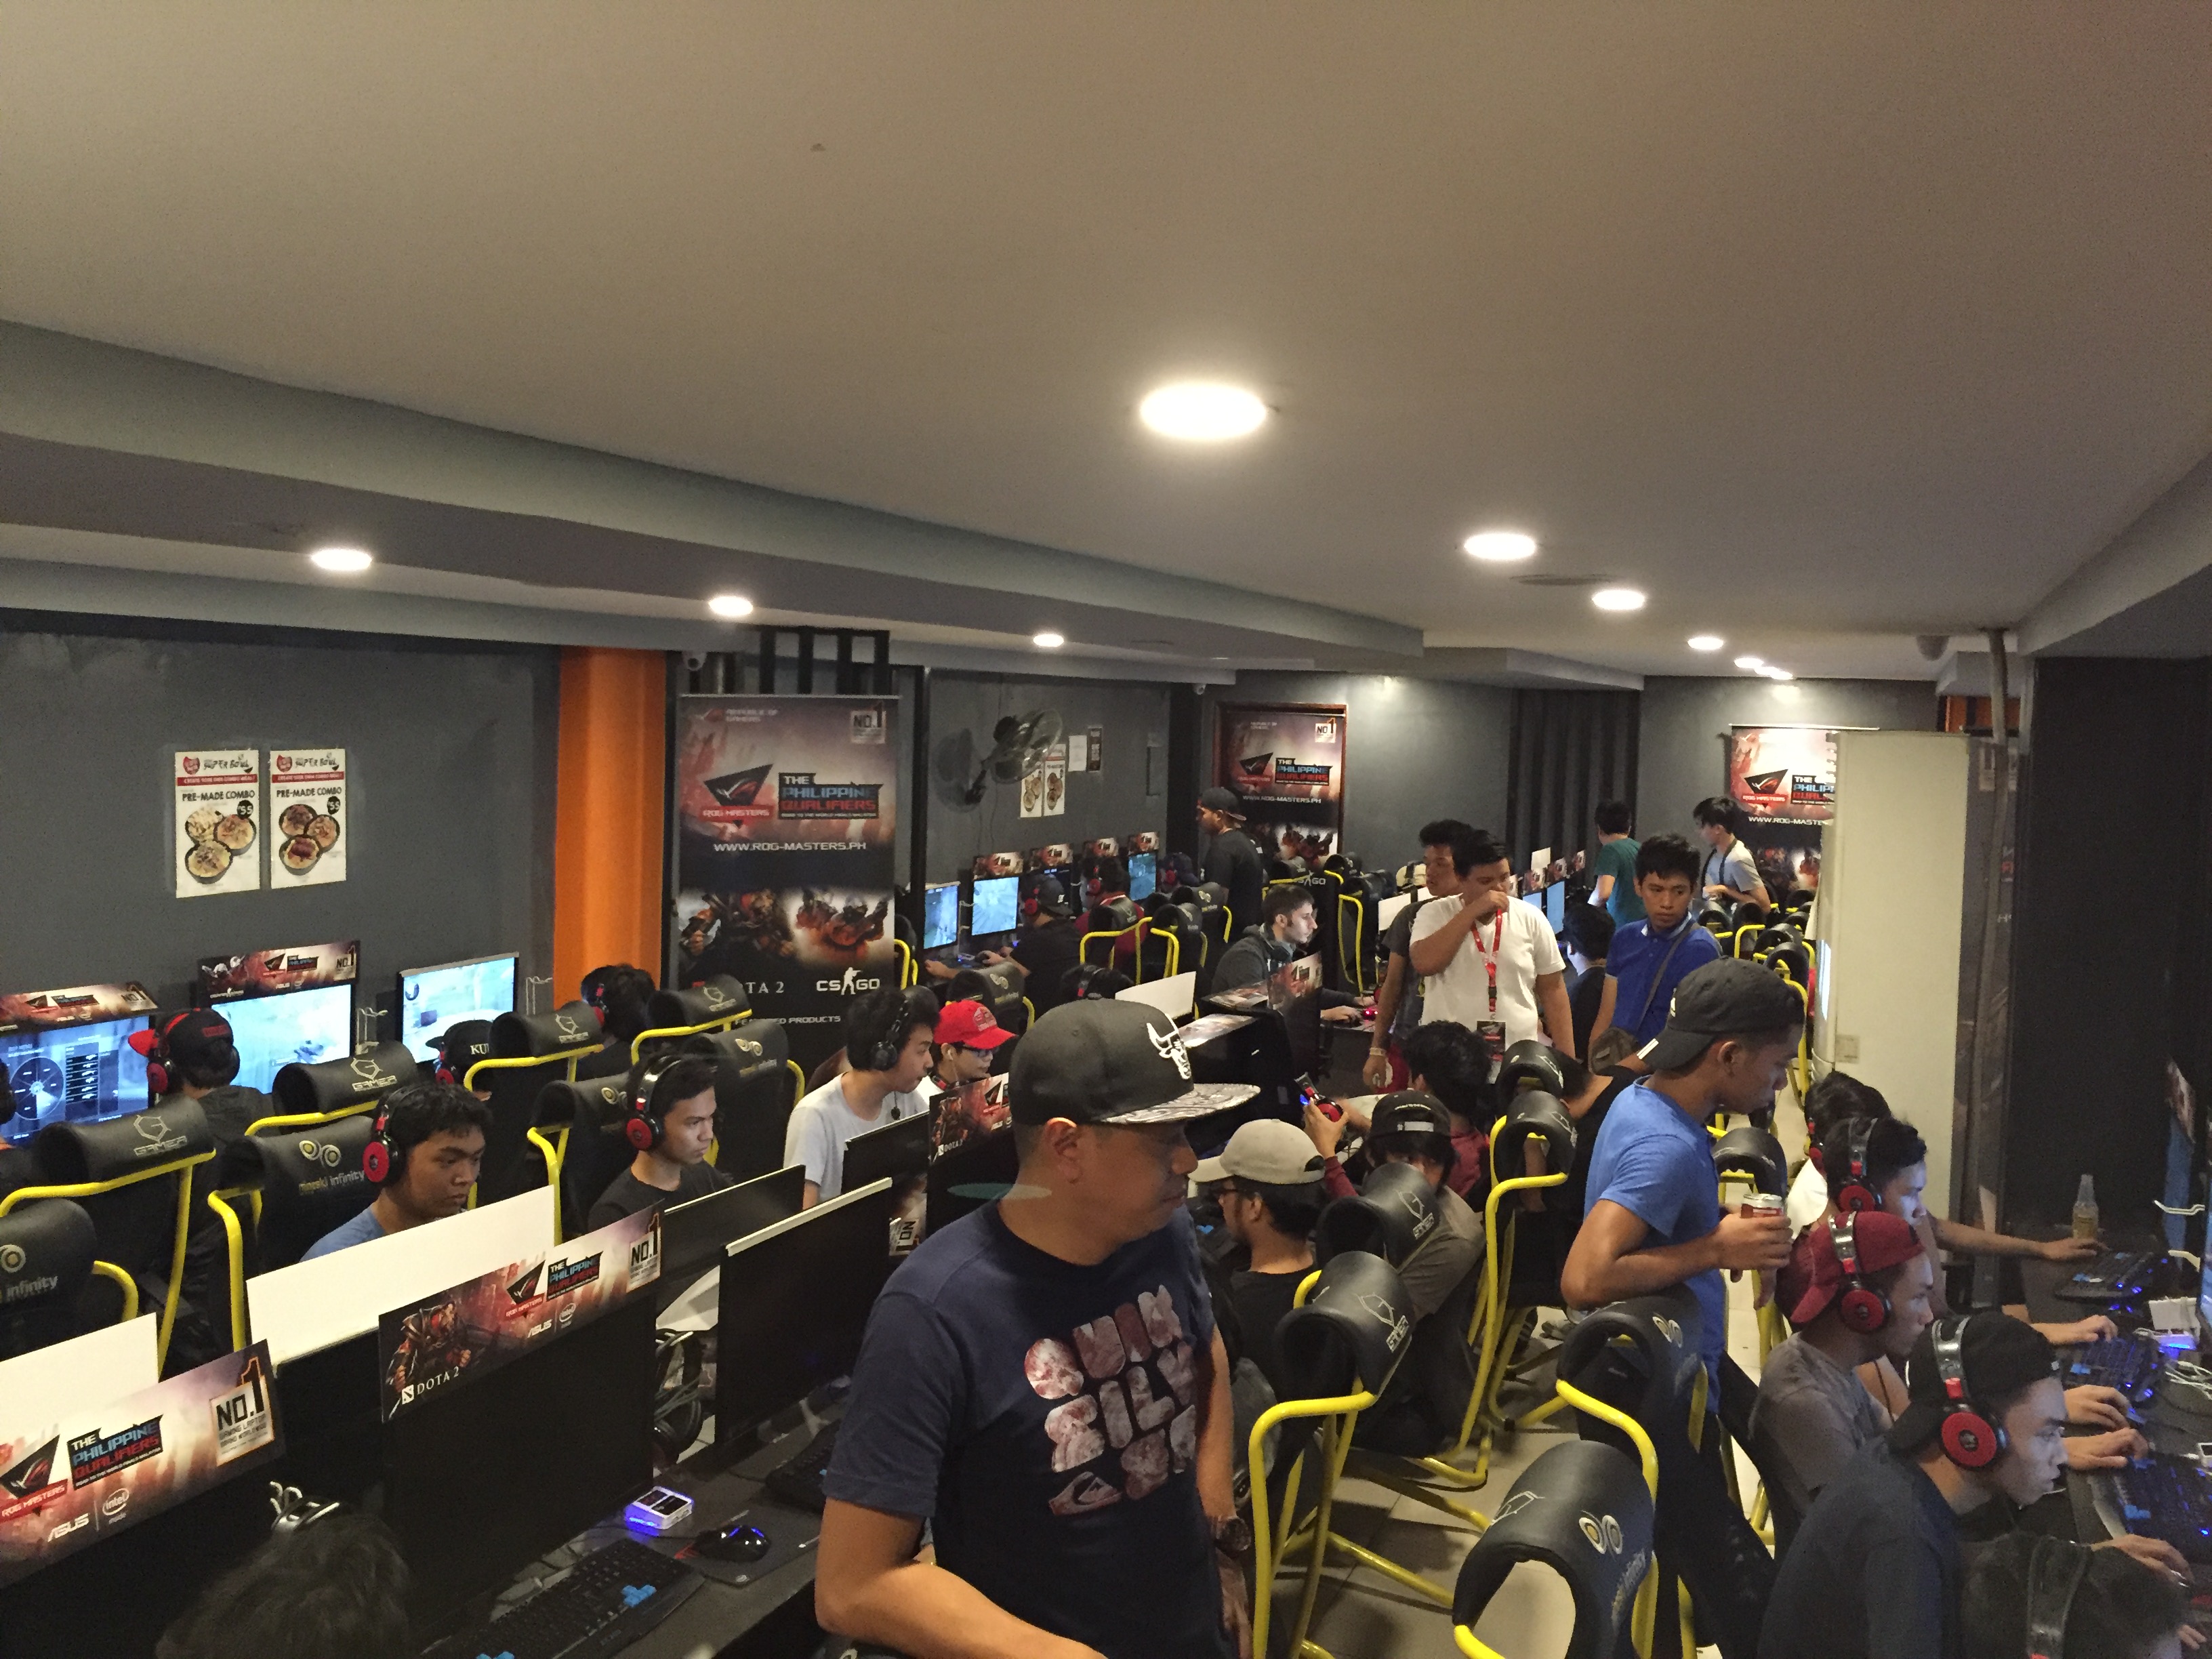 The venue is packed with aspiring teams and an avid audience!